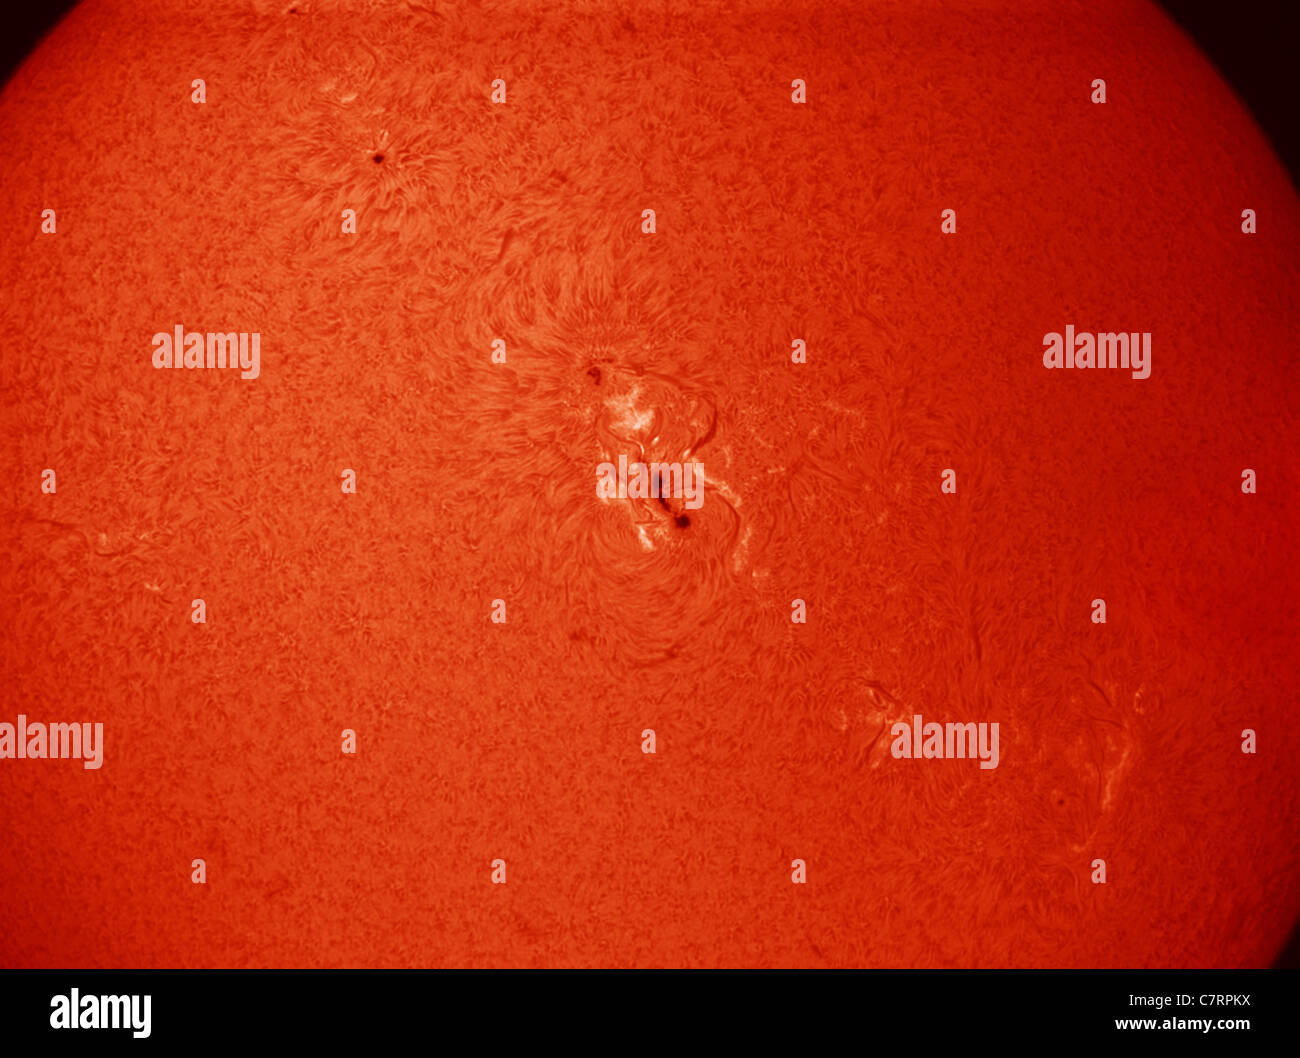 28.9.11. A massive chain of active regions with sunspot group 11302 is currently facing earthwards, seen in this telescope view Stock Photo